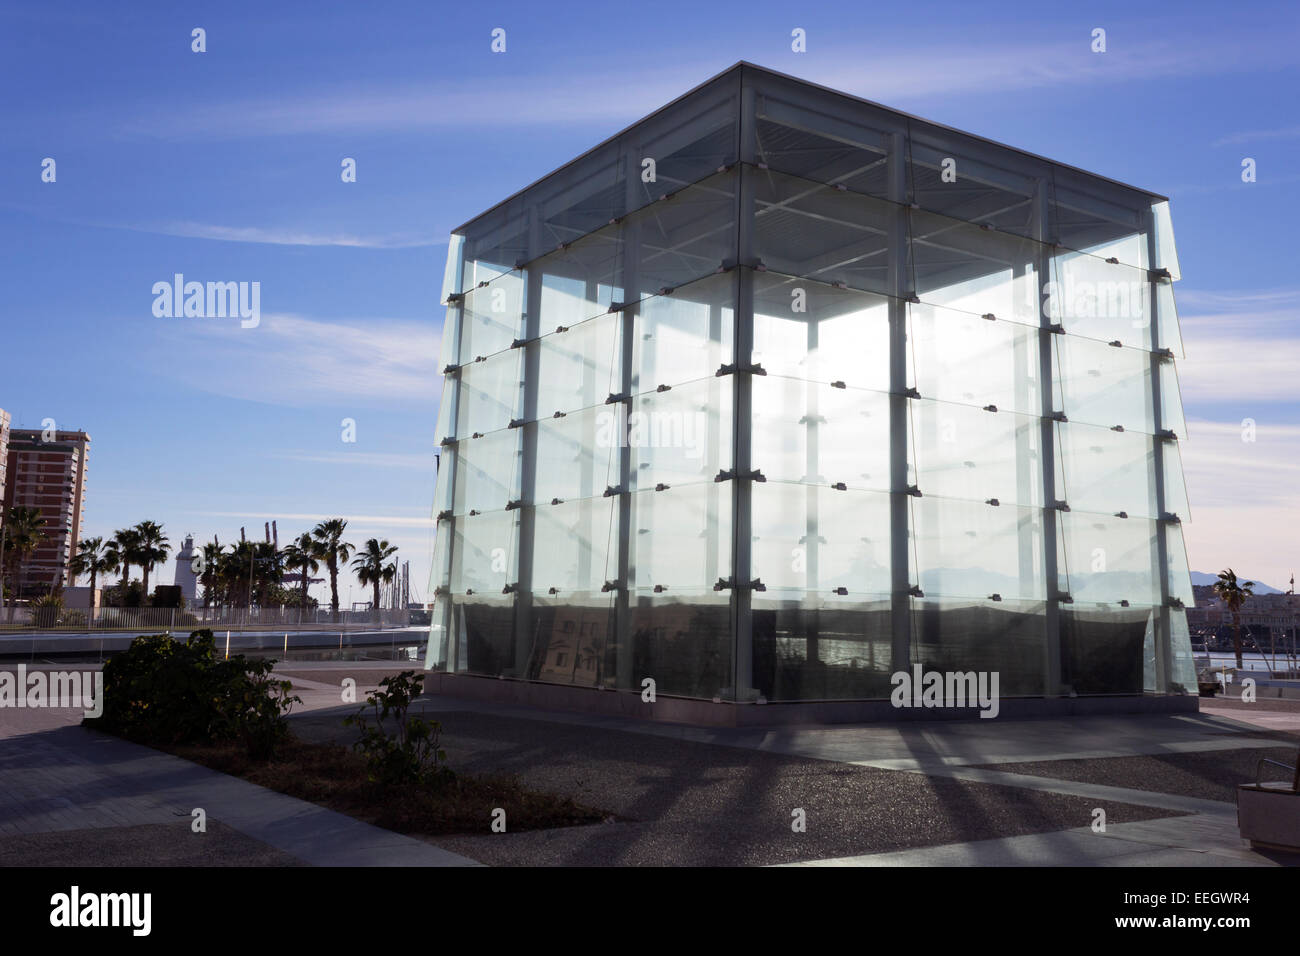 The Pompidou Art Centre, Muelle Uno, Malaga Port, Costa del Sol, Spain.  The 'Cube' is due to be opened in 2015. Stock Photo